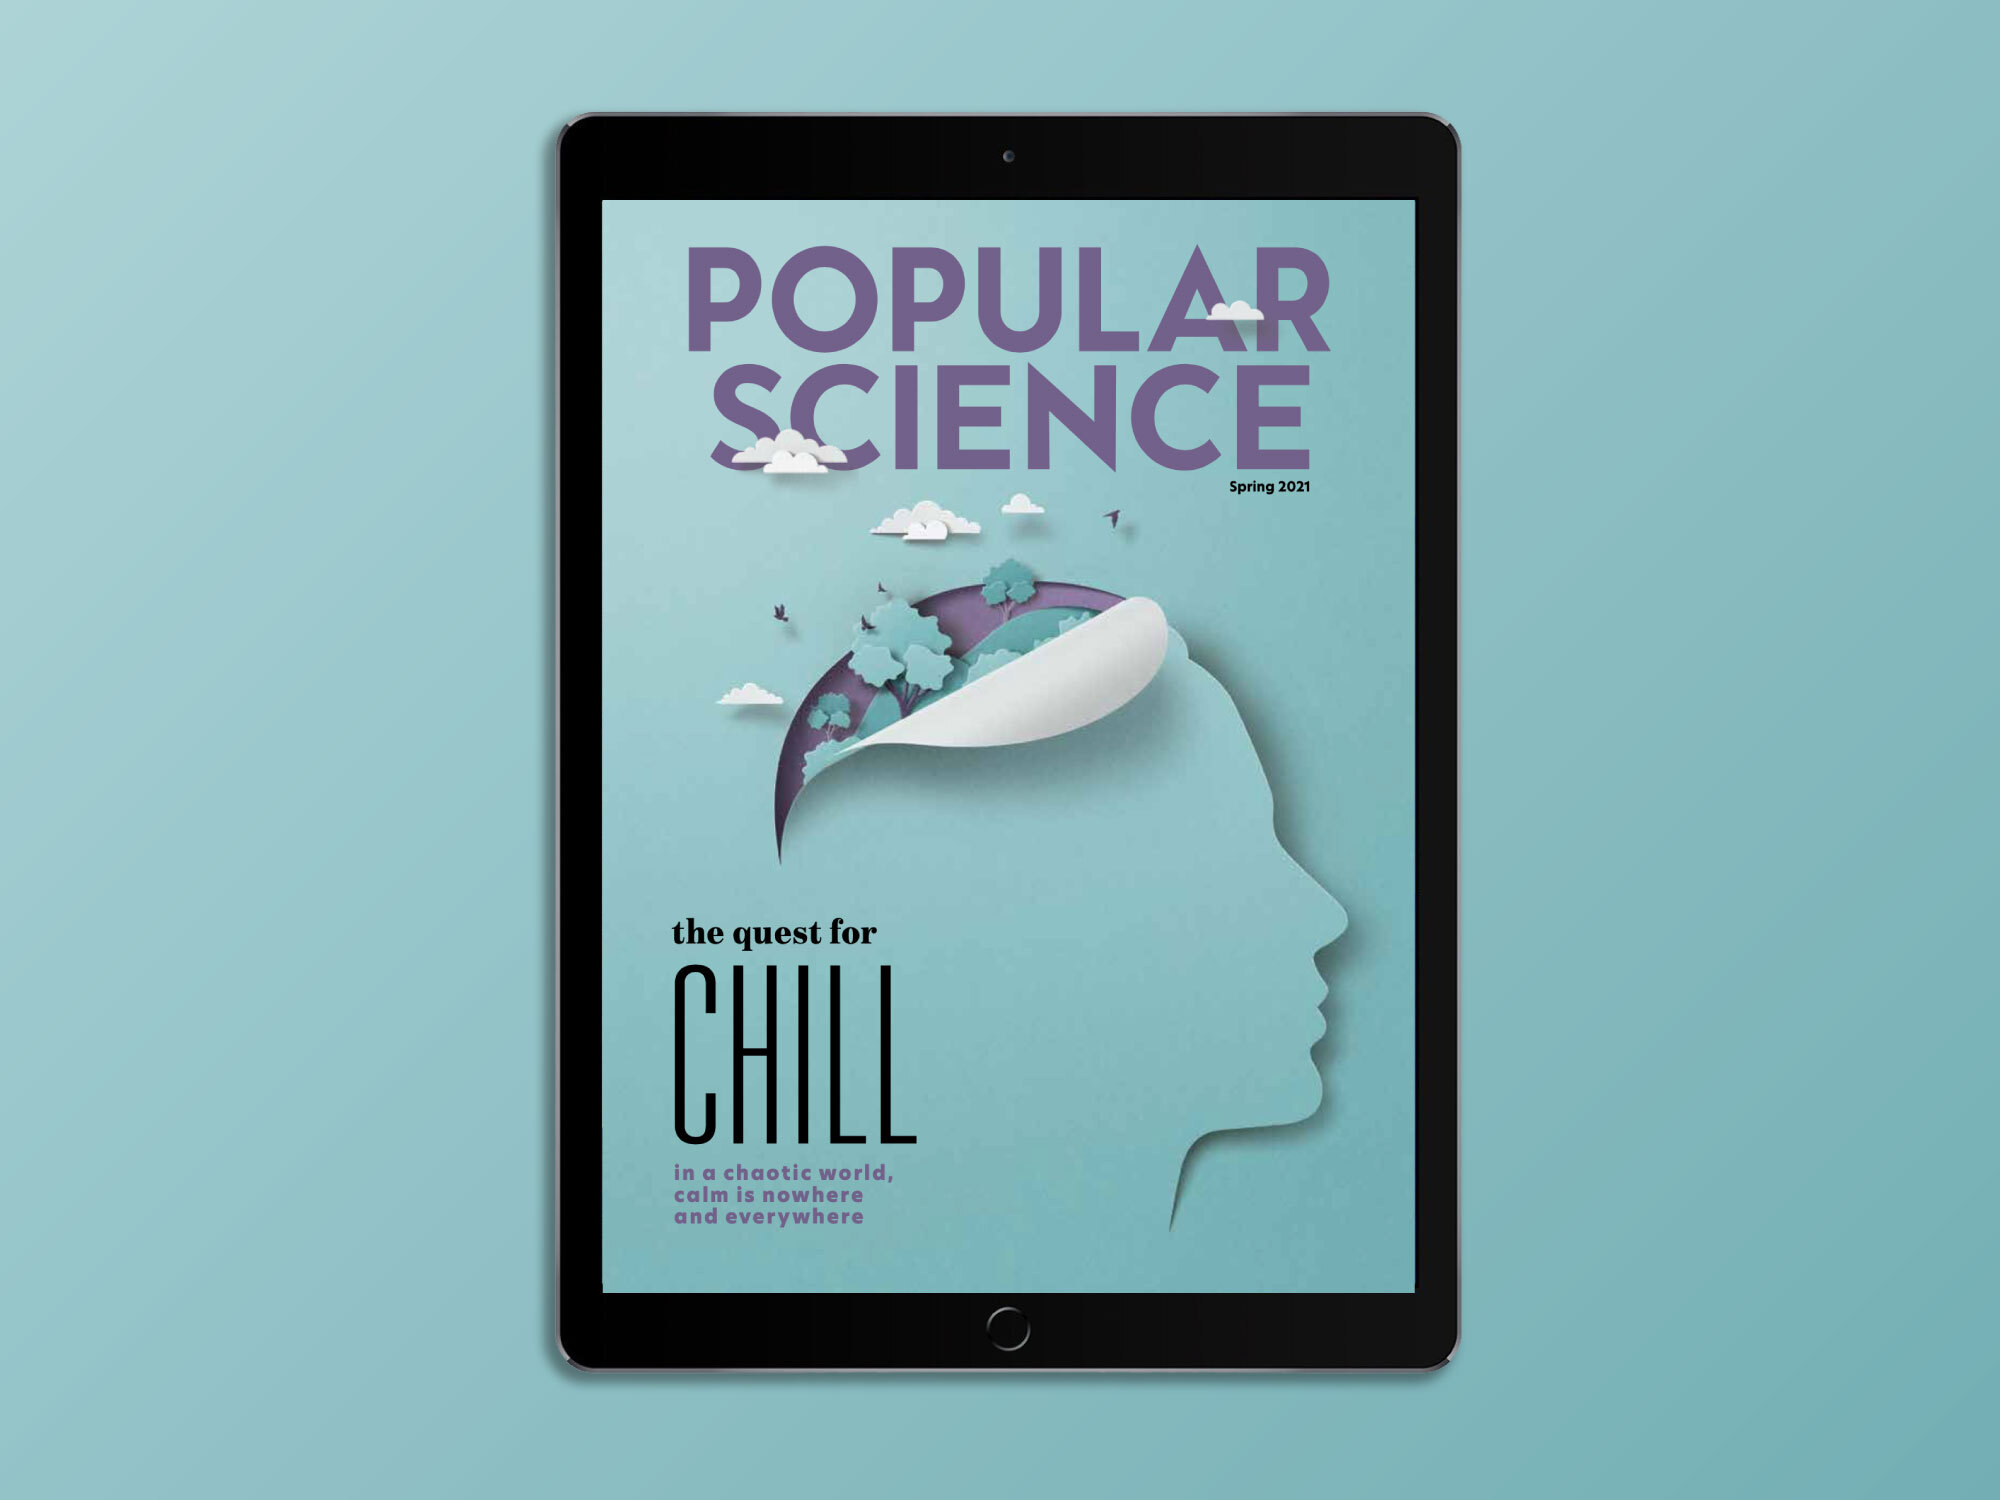 A step-by-step guide to accessing your Popular Science digital subscription